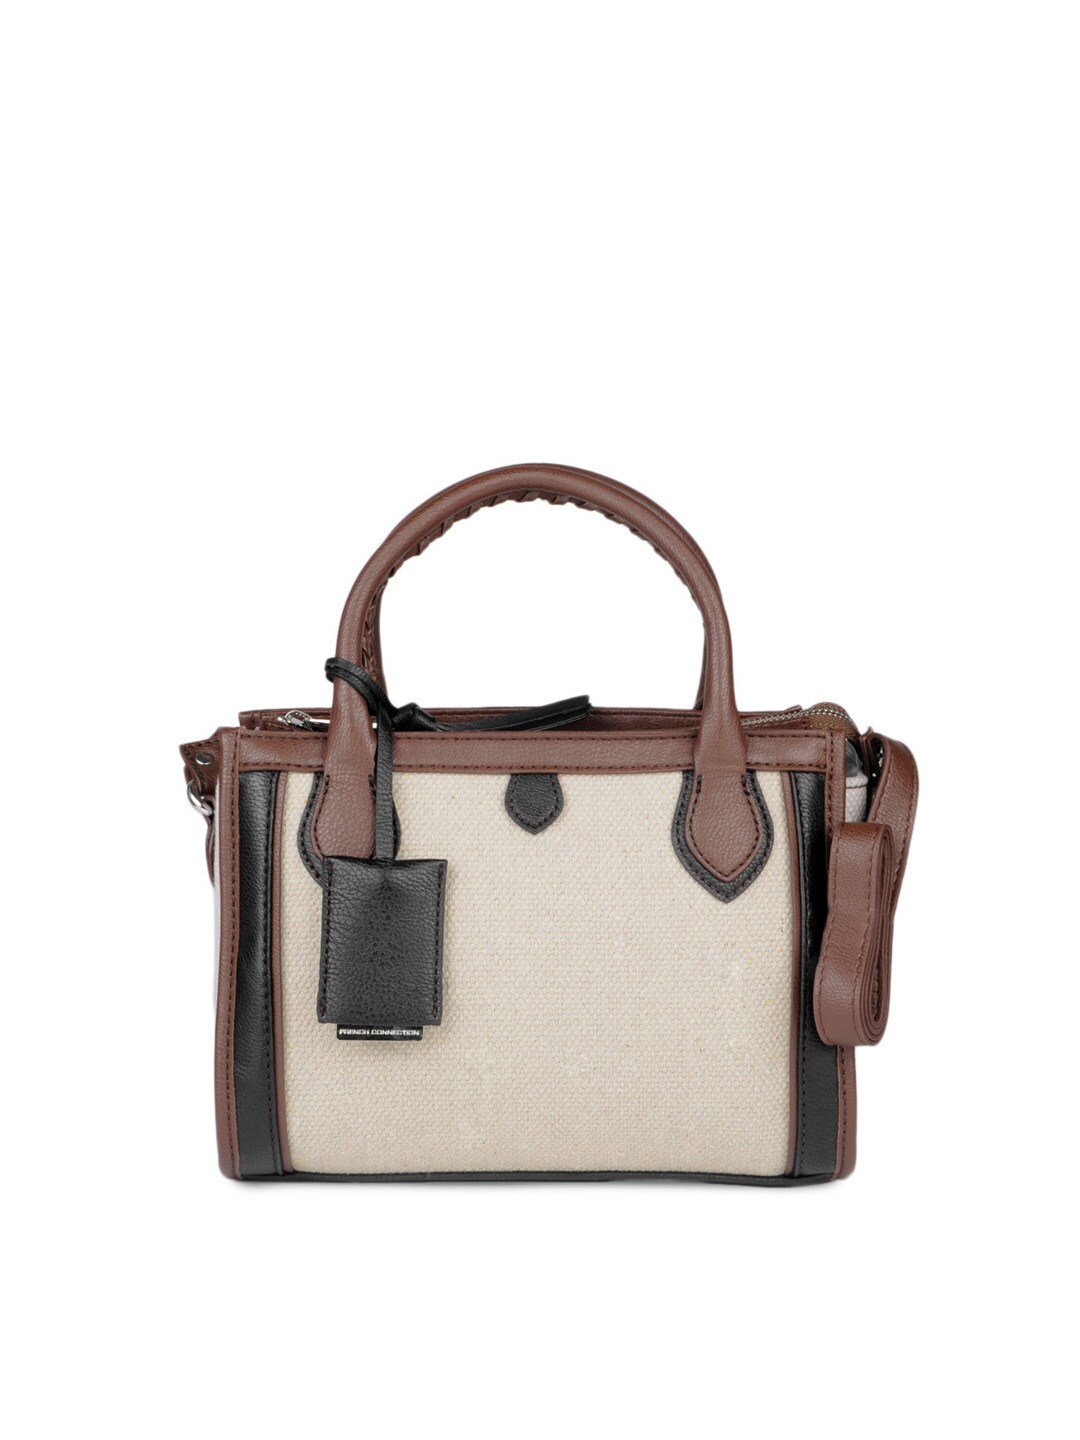 French Connection Women Taupe & Brown Handbag